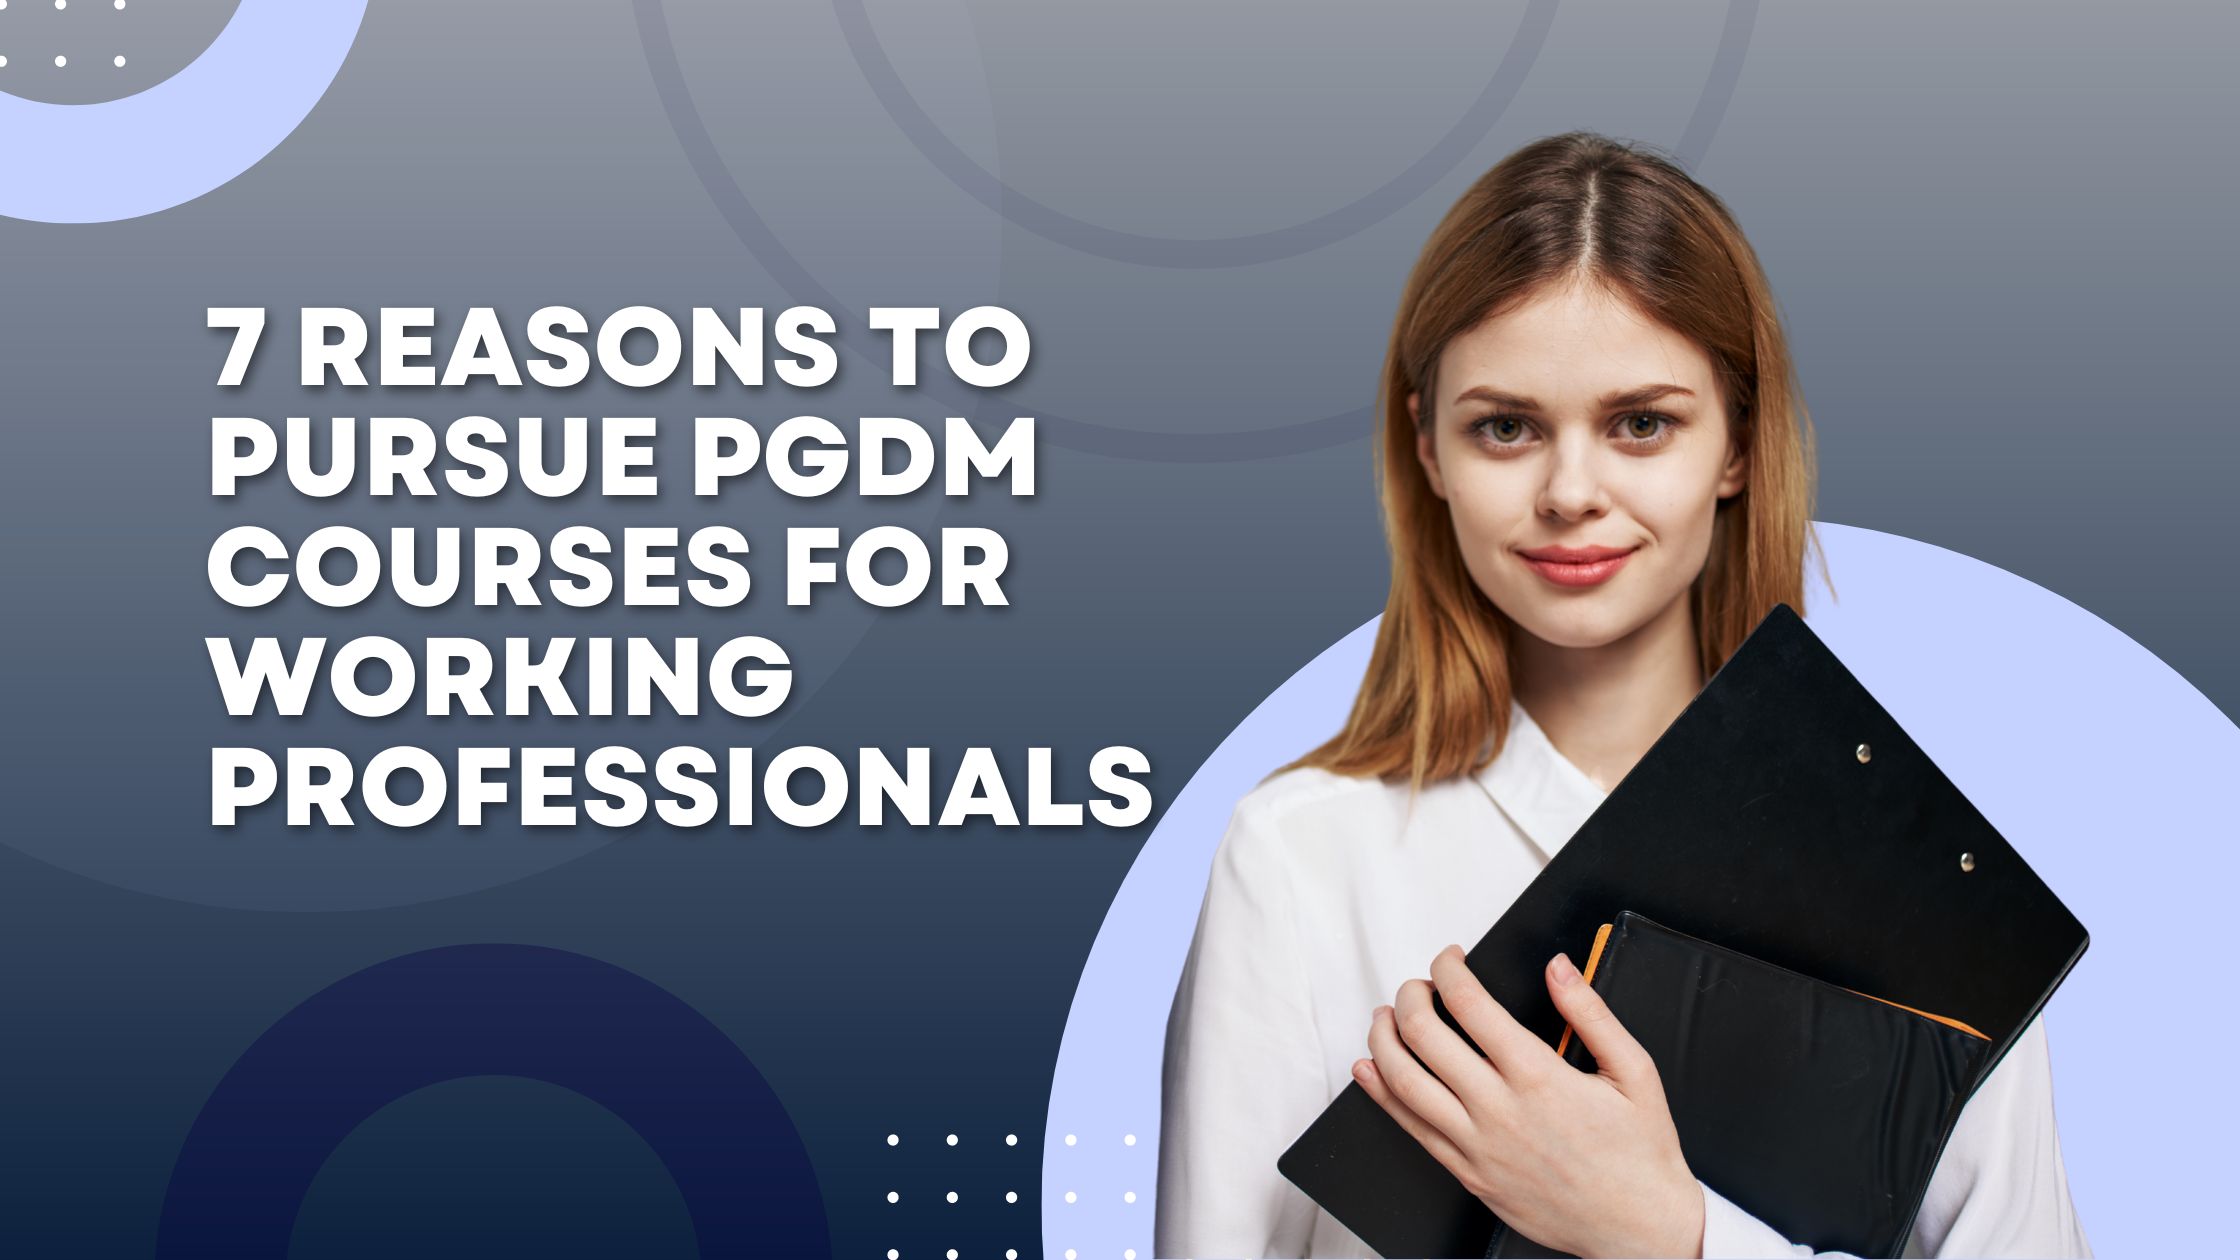 7 Reasons to Pursue PGDM Courses for Working Professionals